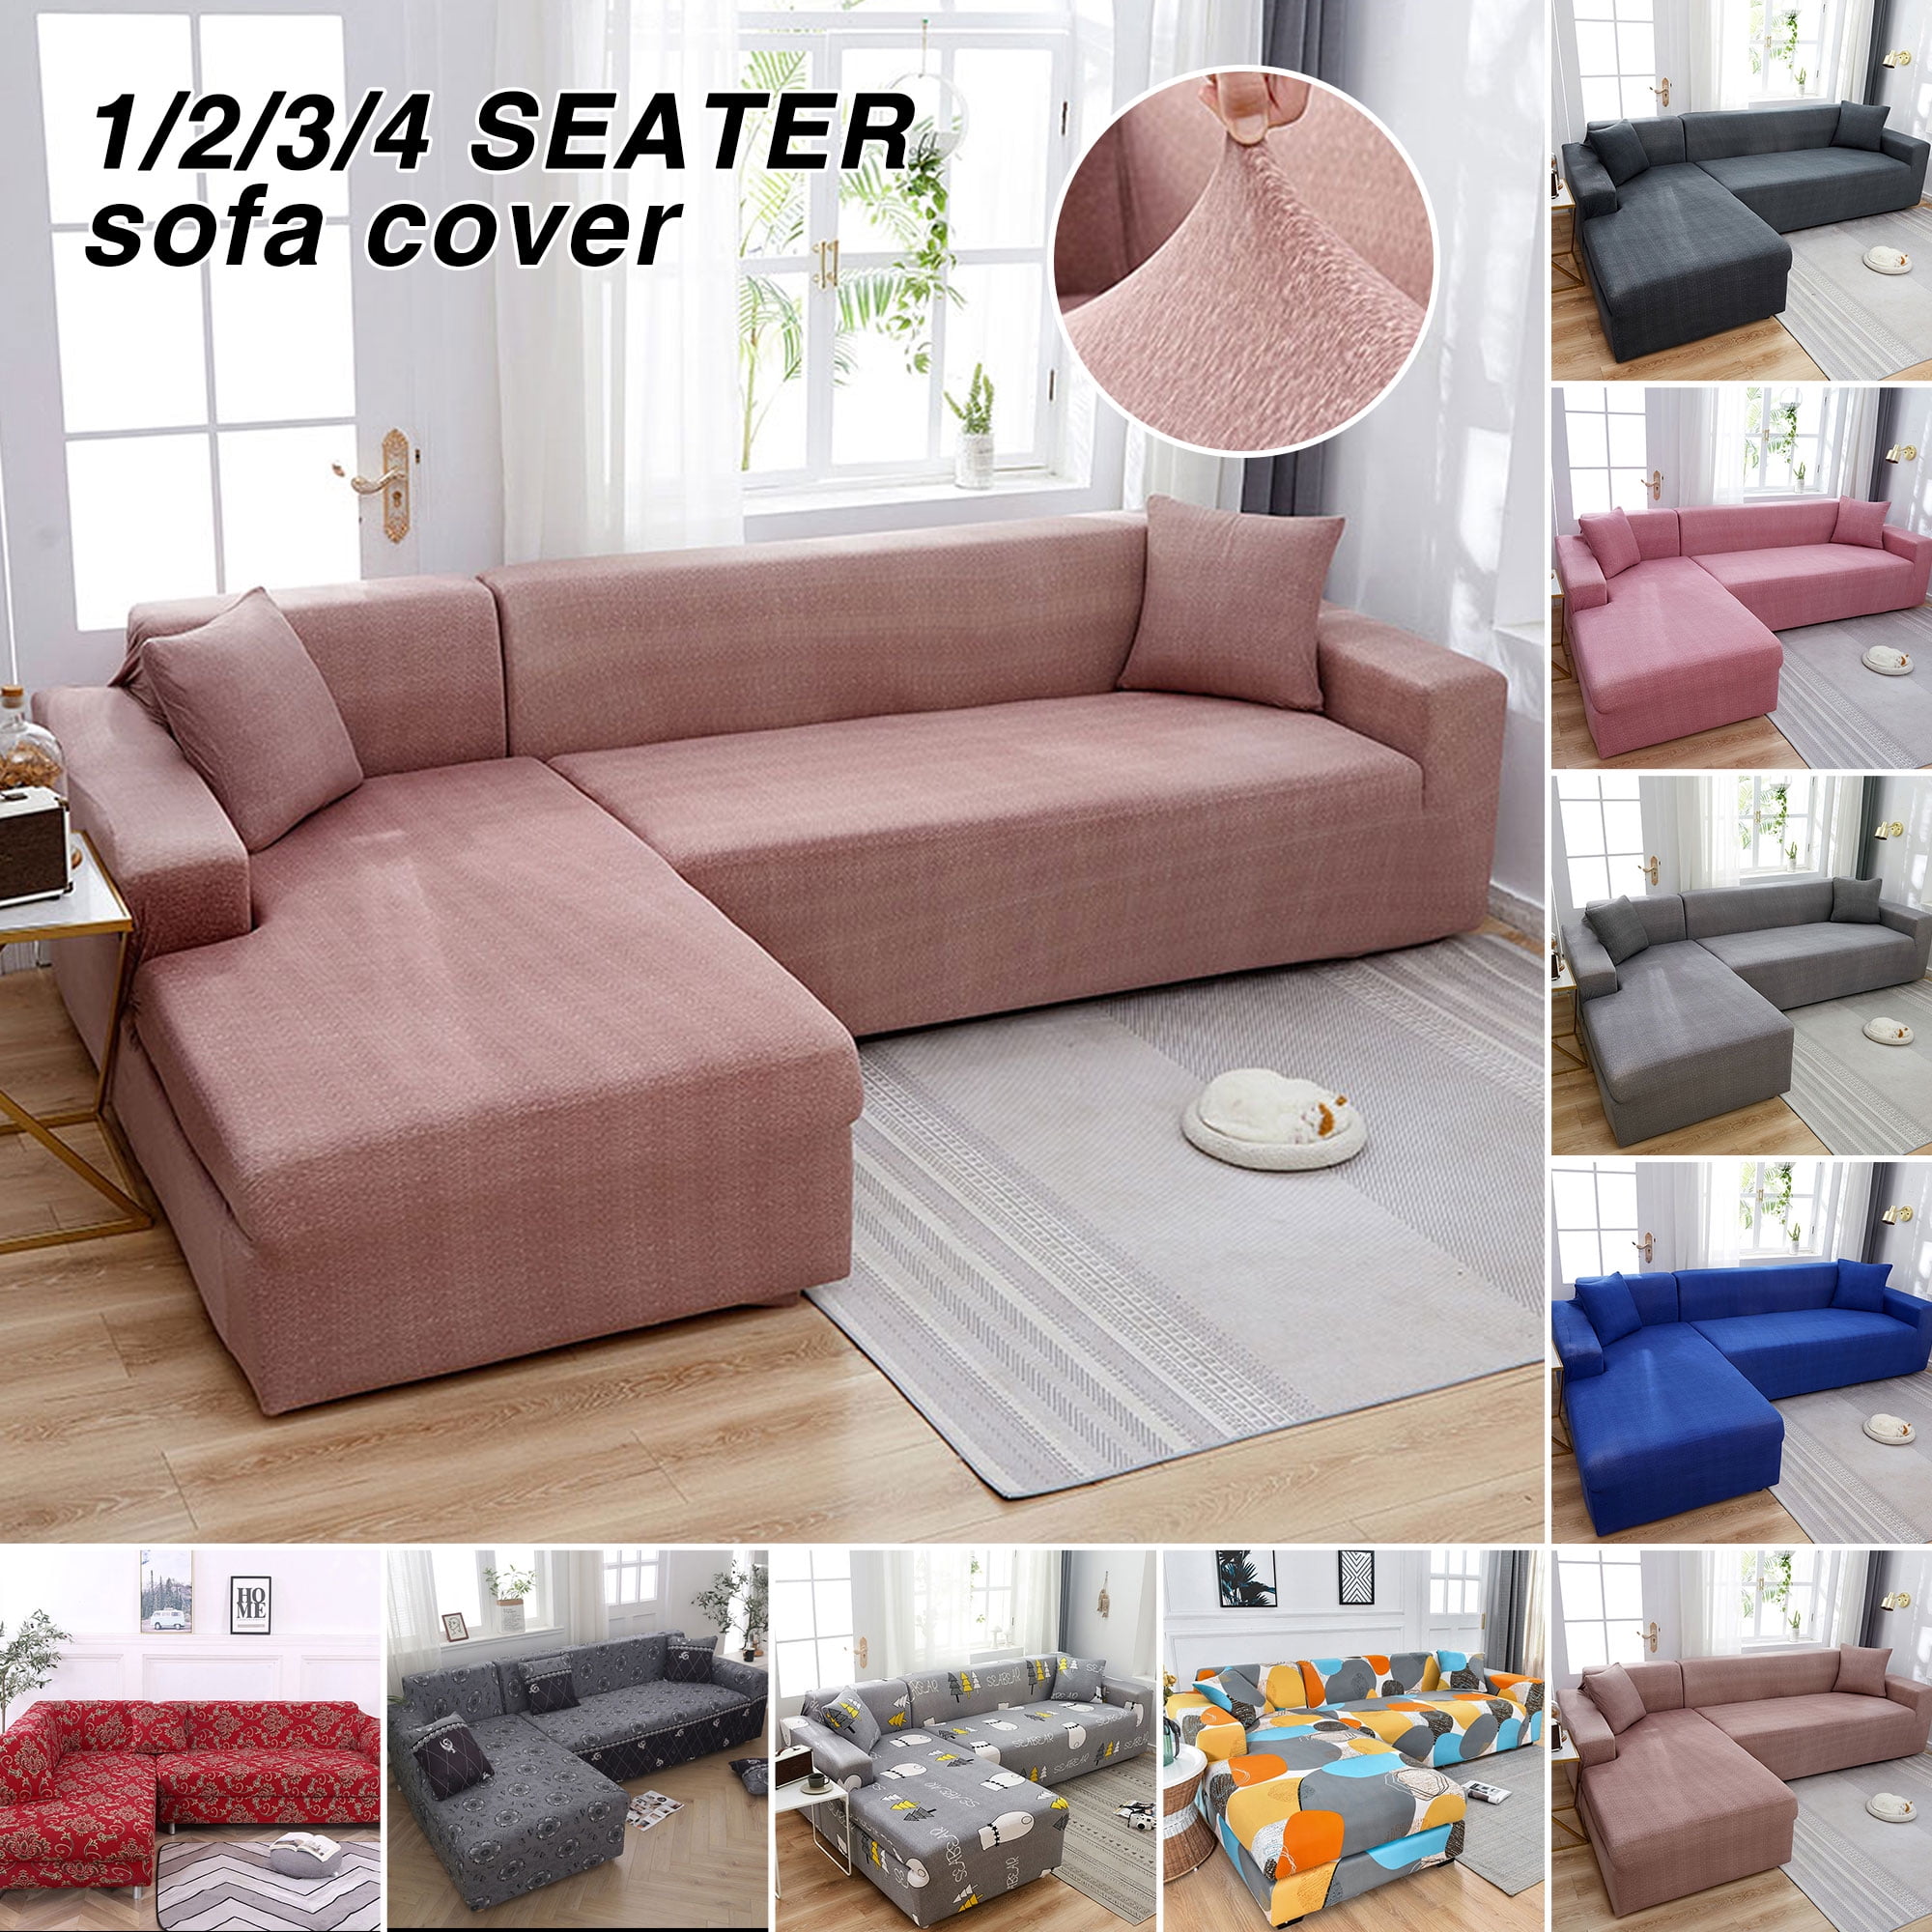 Details about   Sofa Cover 1/2/3/4Seater Stretch Lounge Slipcover Protector Couch Cover Washable 